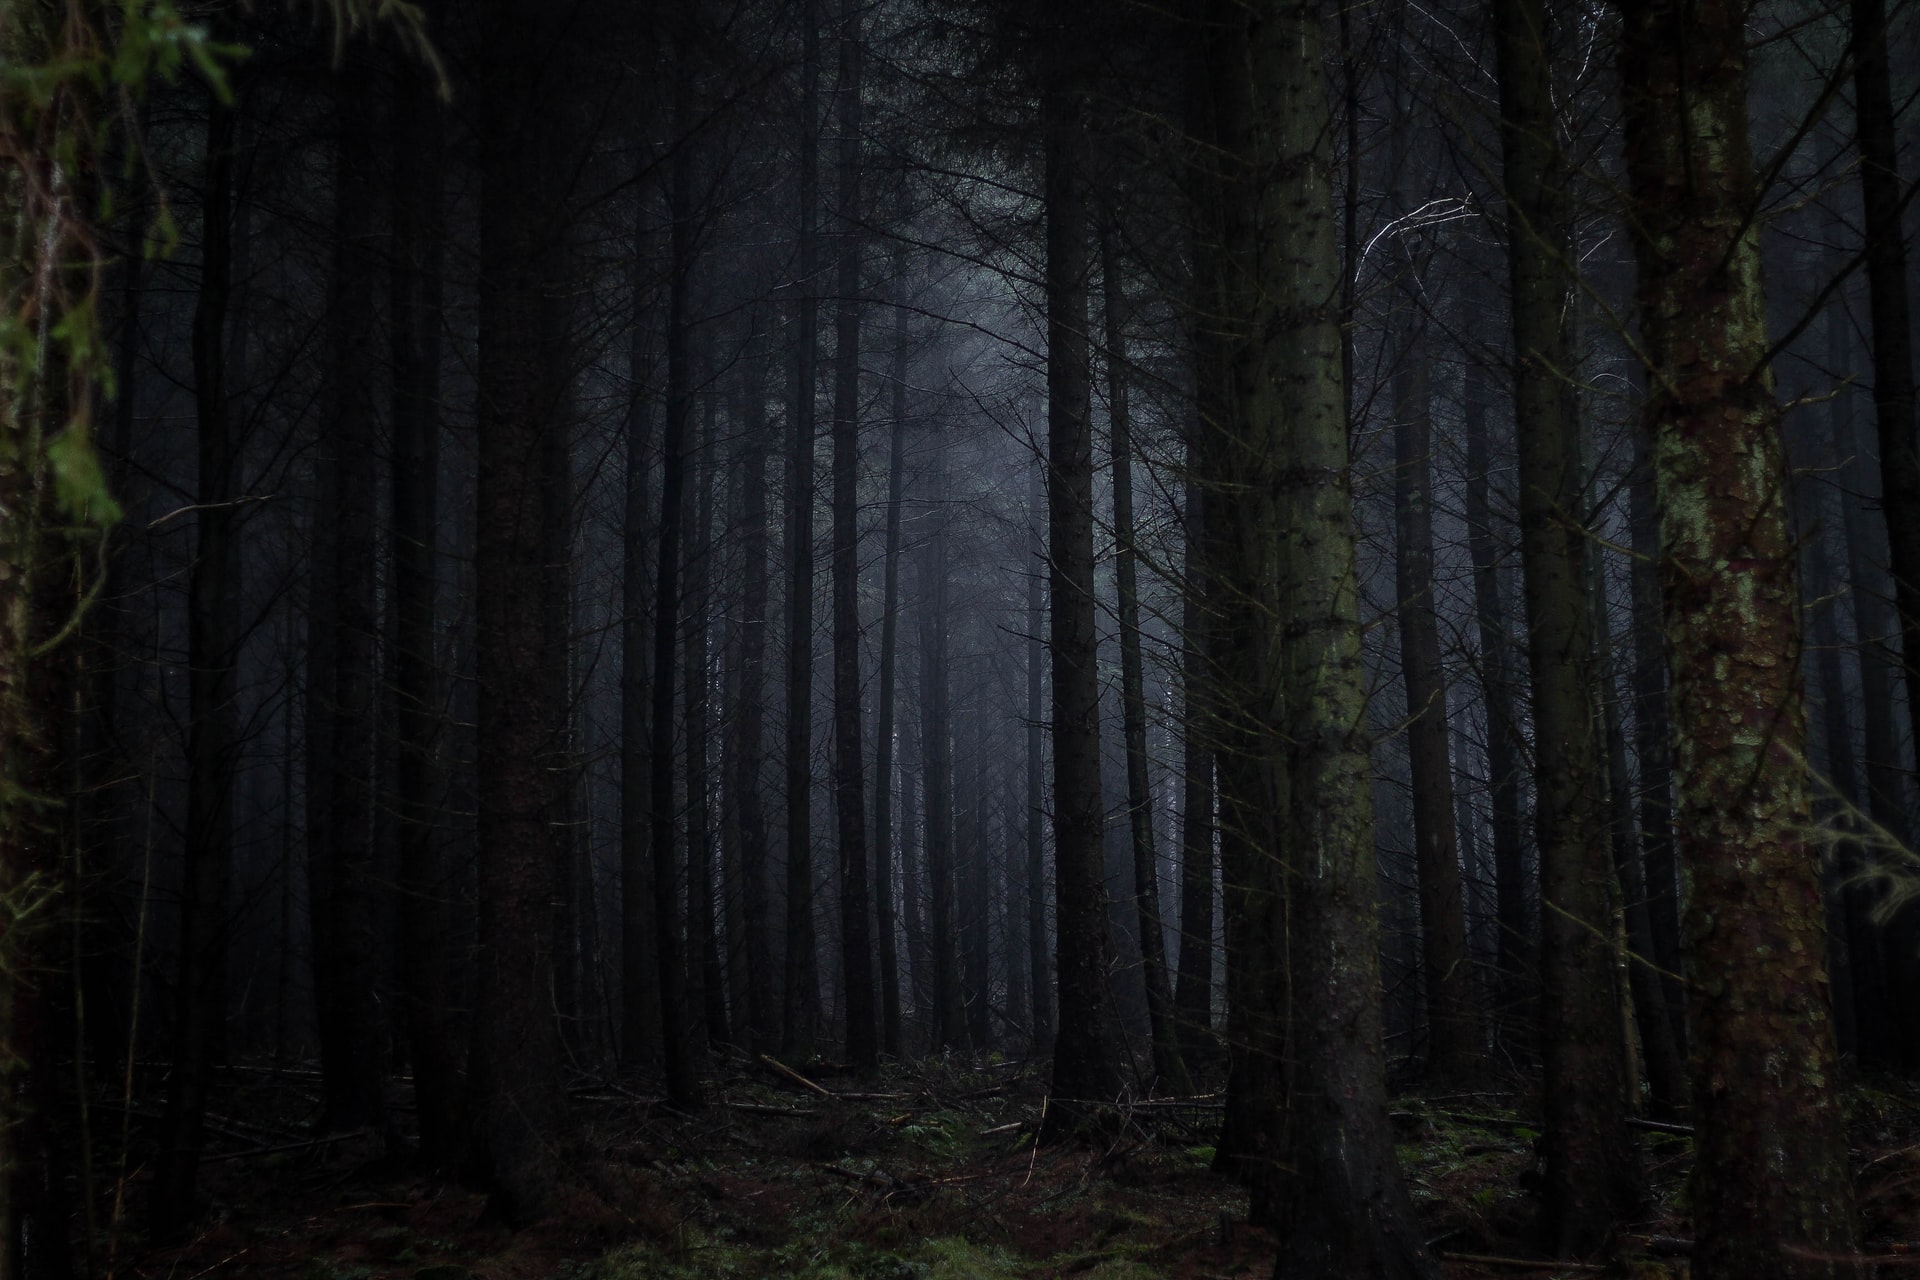 A dark forest of closeknit trees.